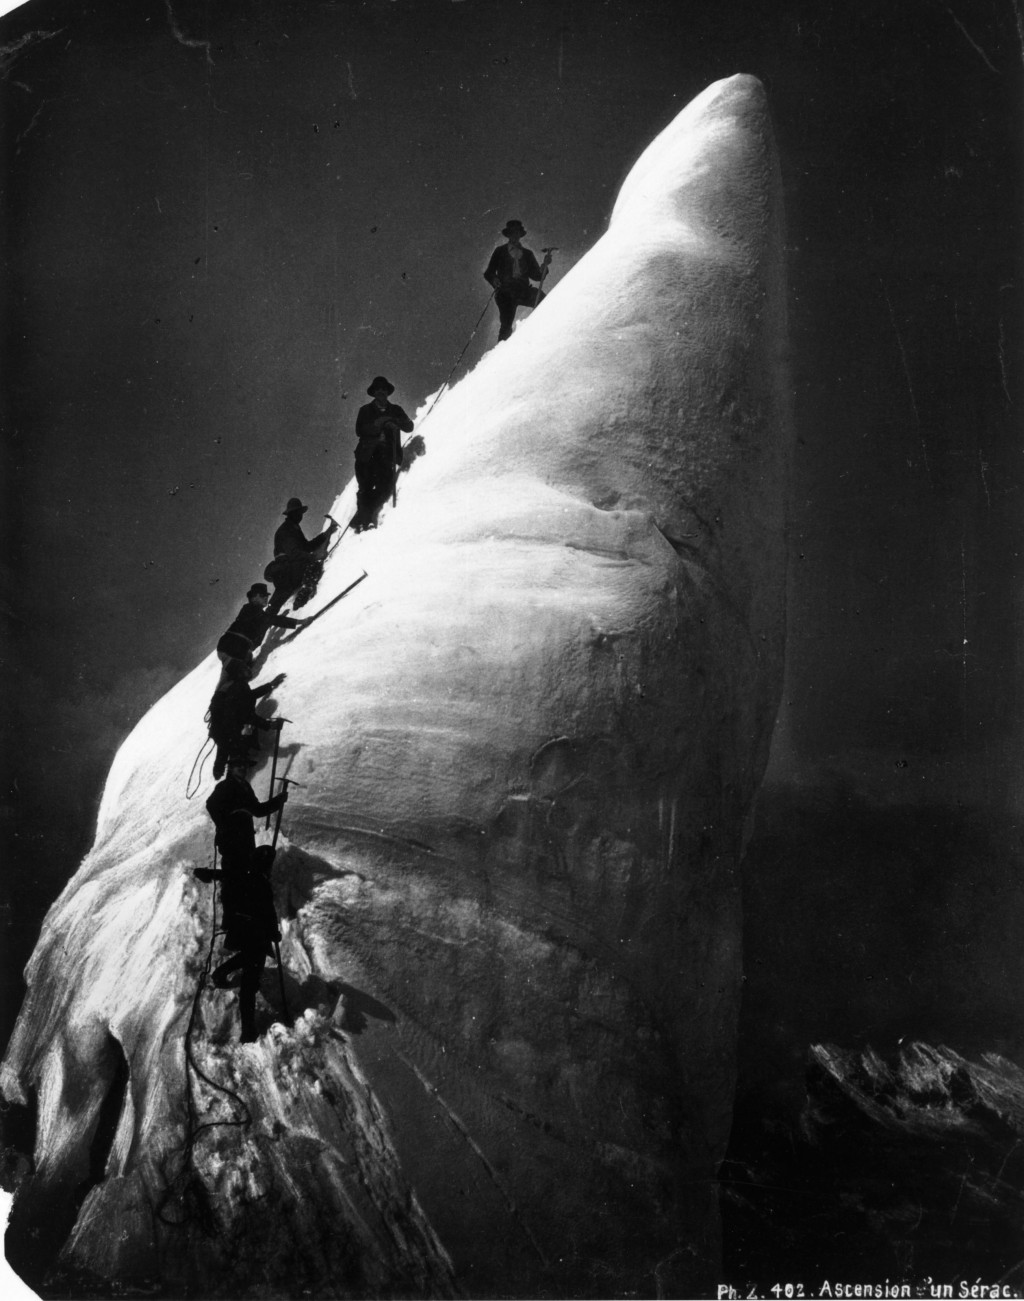 Alpine mountaineers tackling a peak or serac.   (Photo by Hulton Archive/Getty Images)